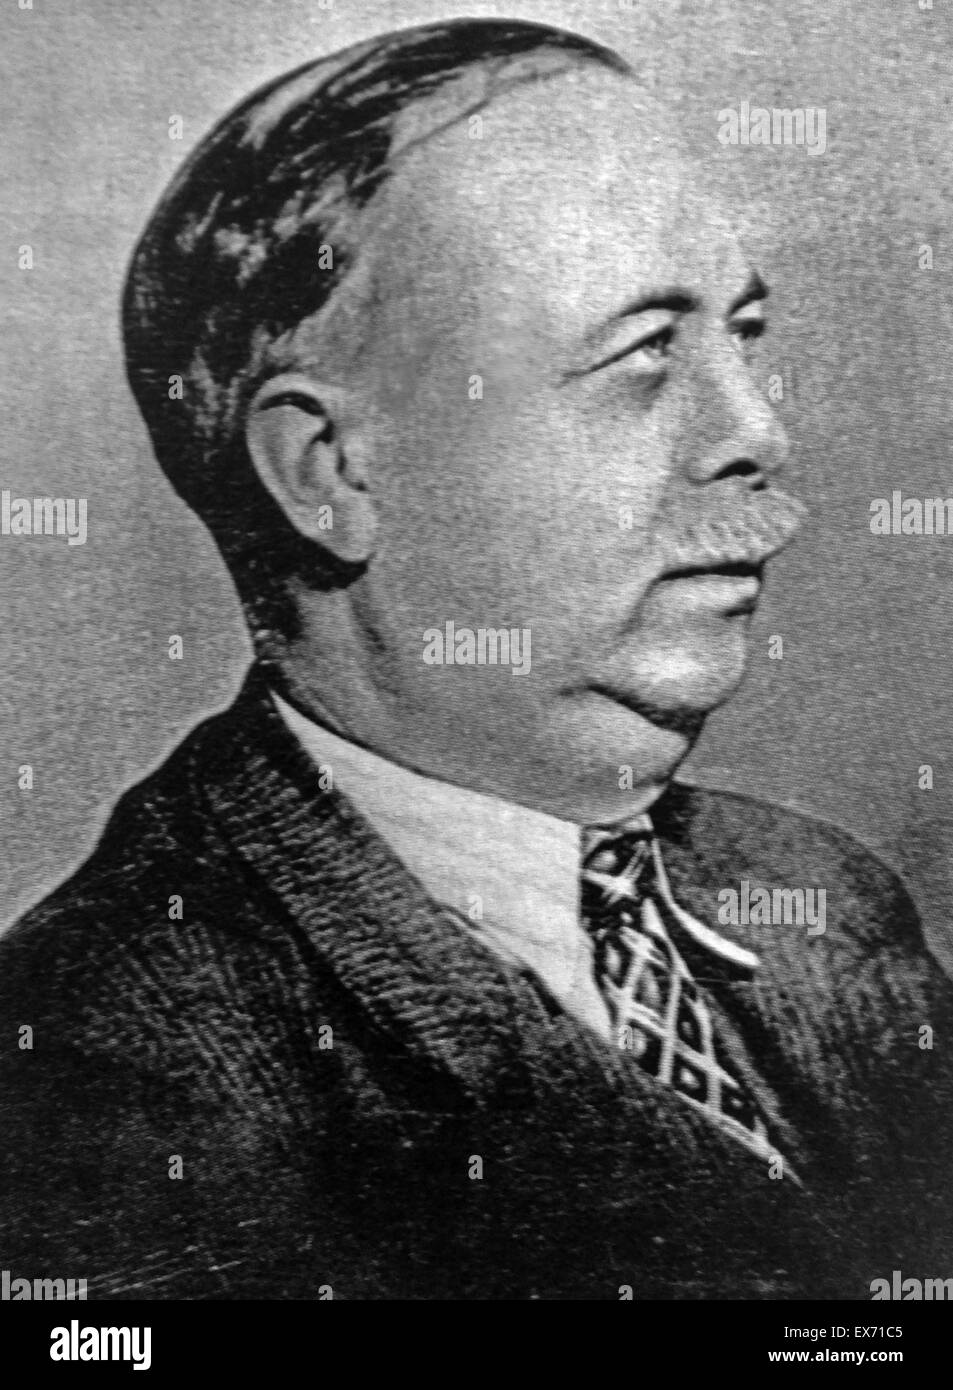 André Marty (1886 - 23 November 1956) leading figure in the French Communist Party. He was a member of the National Assembly and Secretary of Comintern from 1935 to 1944. Political Commissar of the International Brigades during the Spanish Civil War from Stock Photo